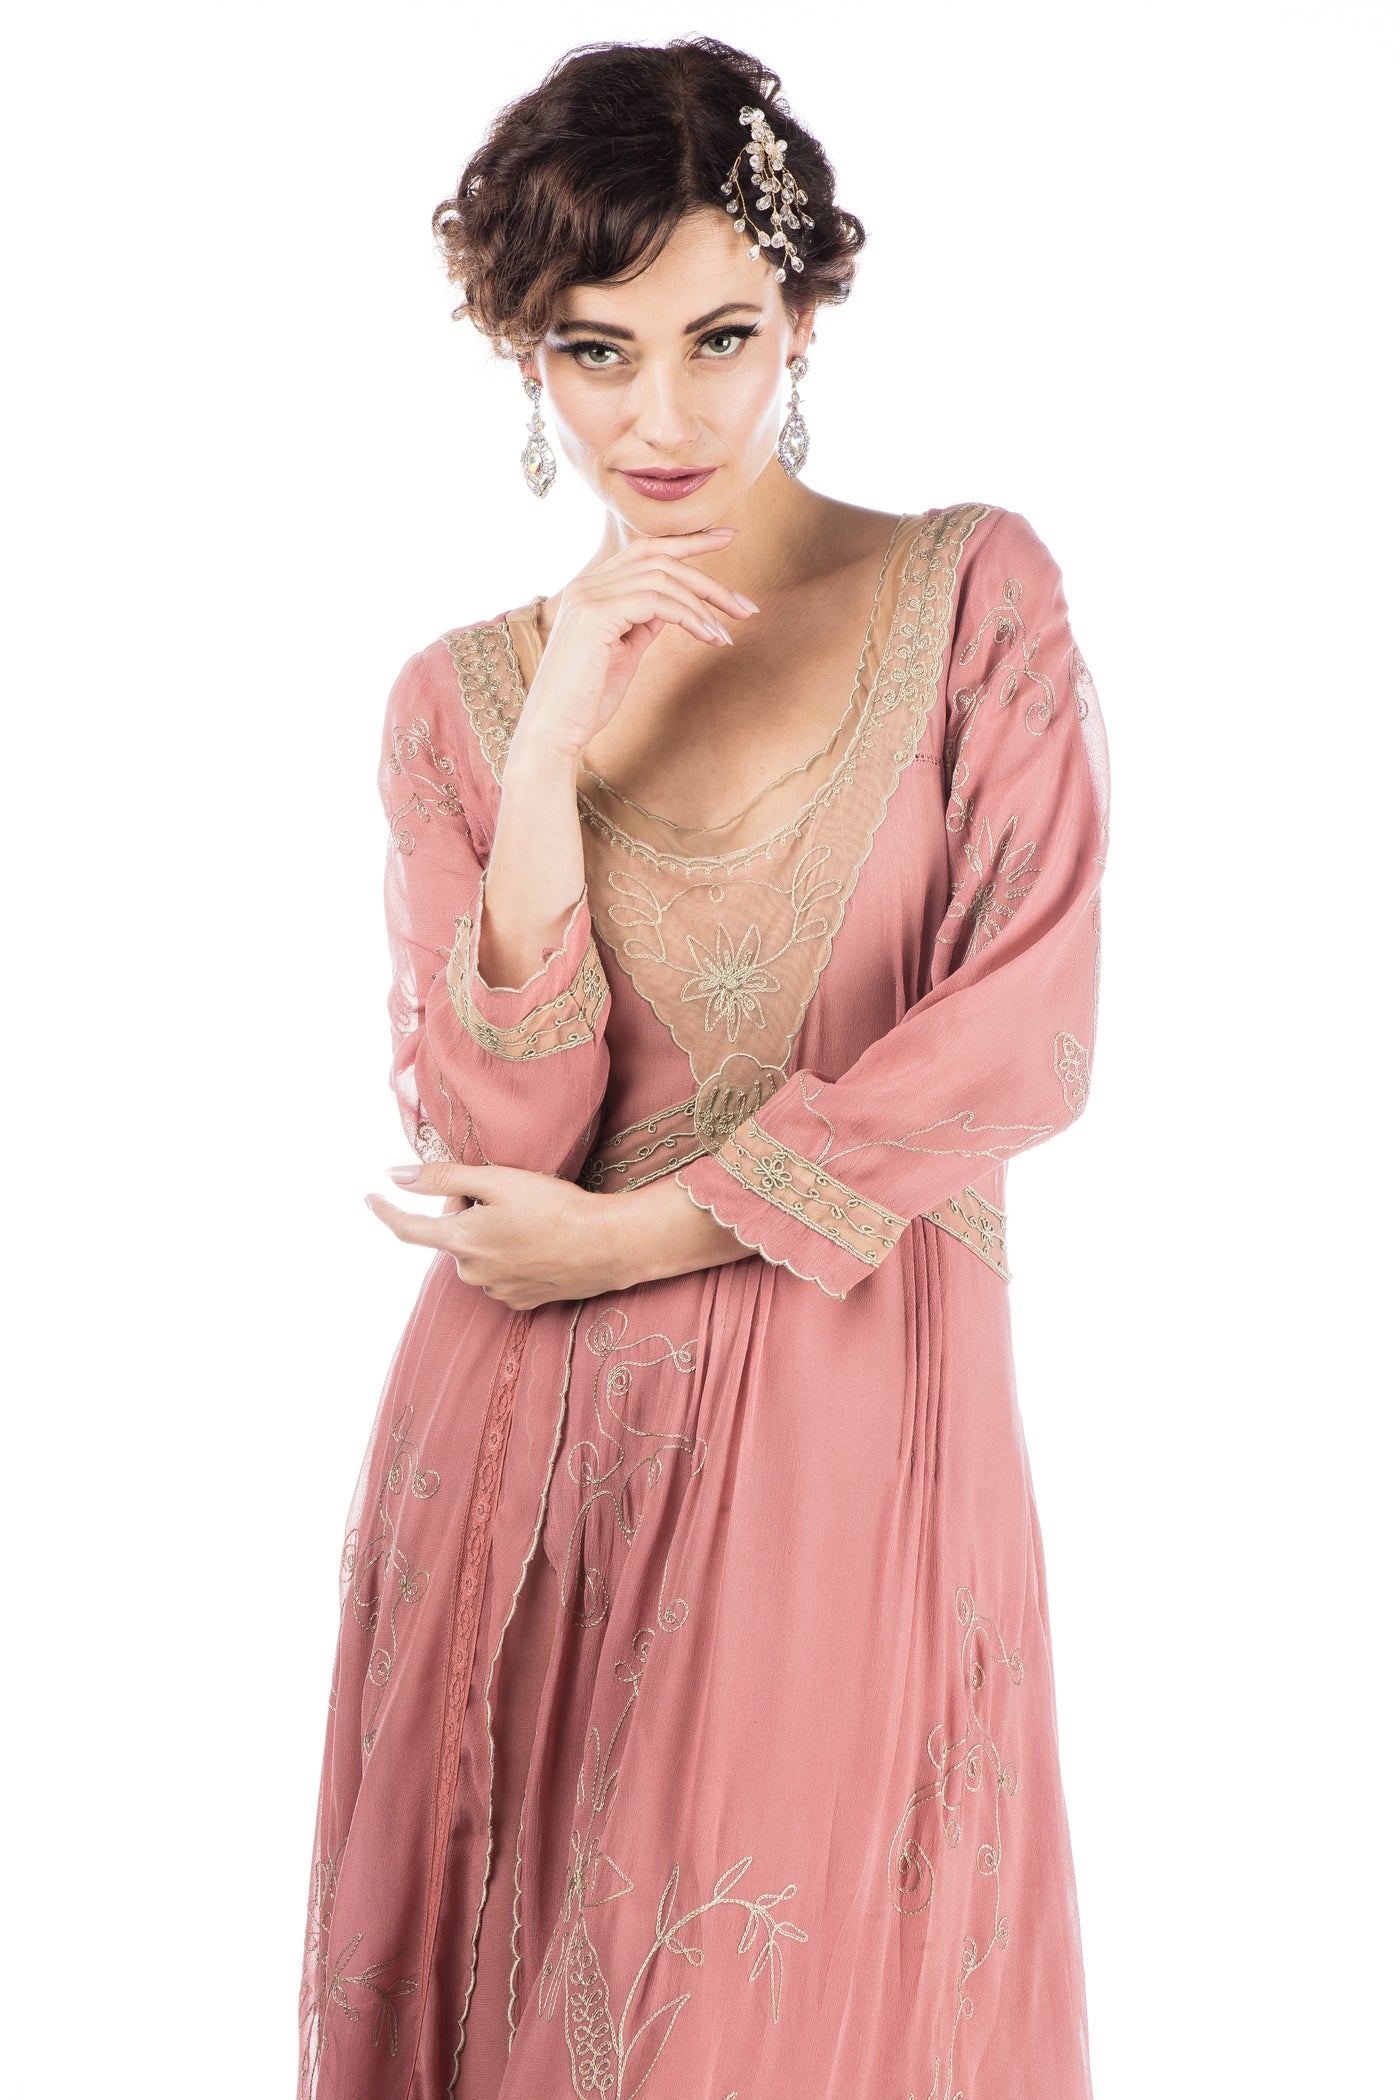 Edith-Downton-Abbey-Inspired-Dress-in-Pink-Beige-by-Nataya-4